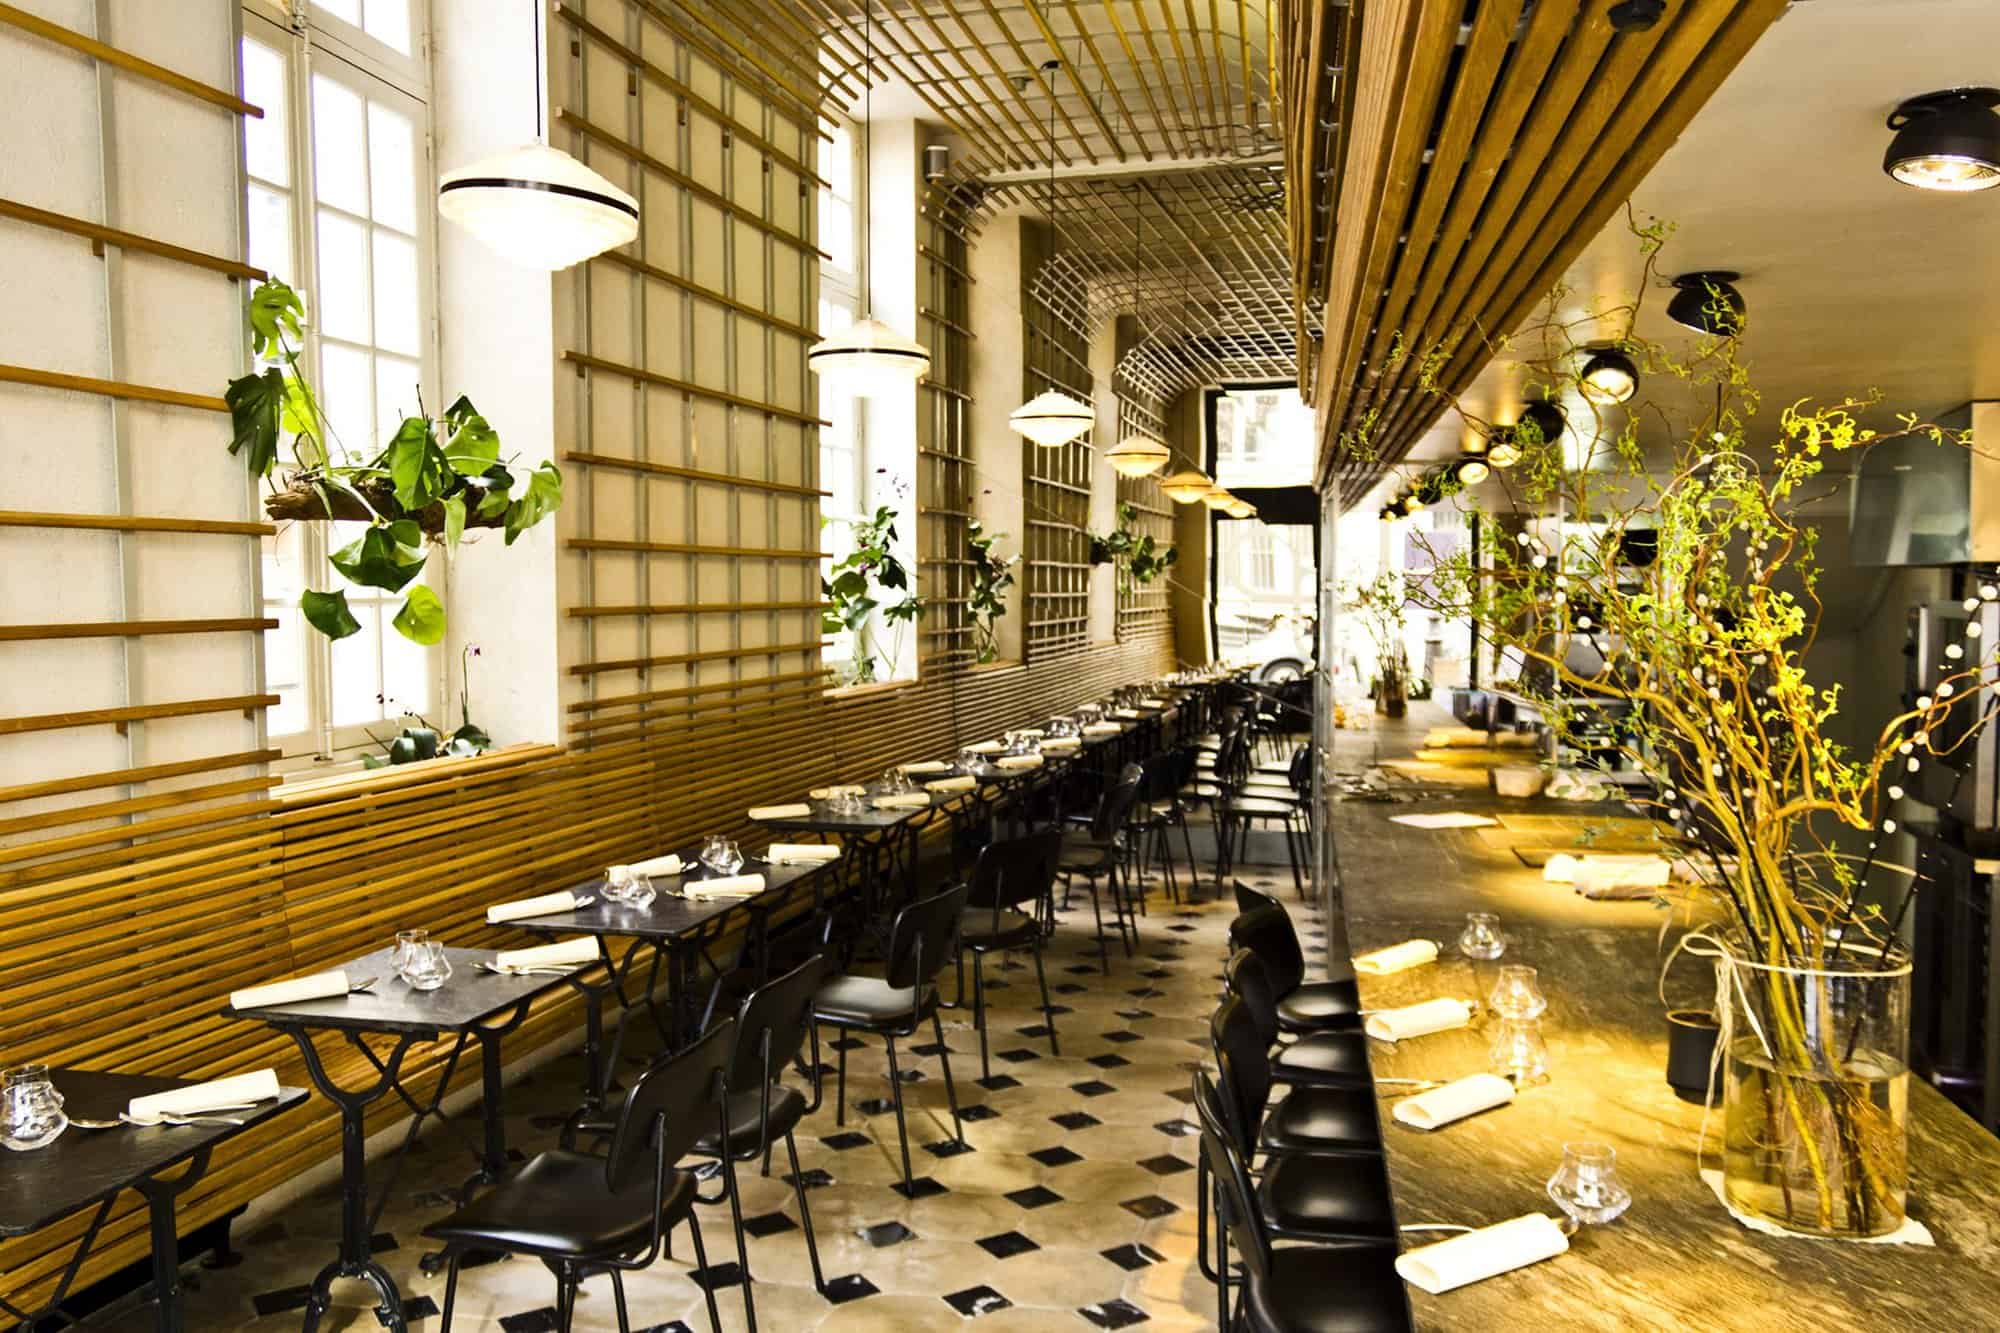 Left: the interior of the restaurant Dessance with wood panelling, plants, tiled floor and black tables and chairs.